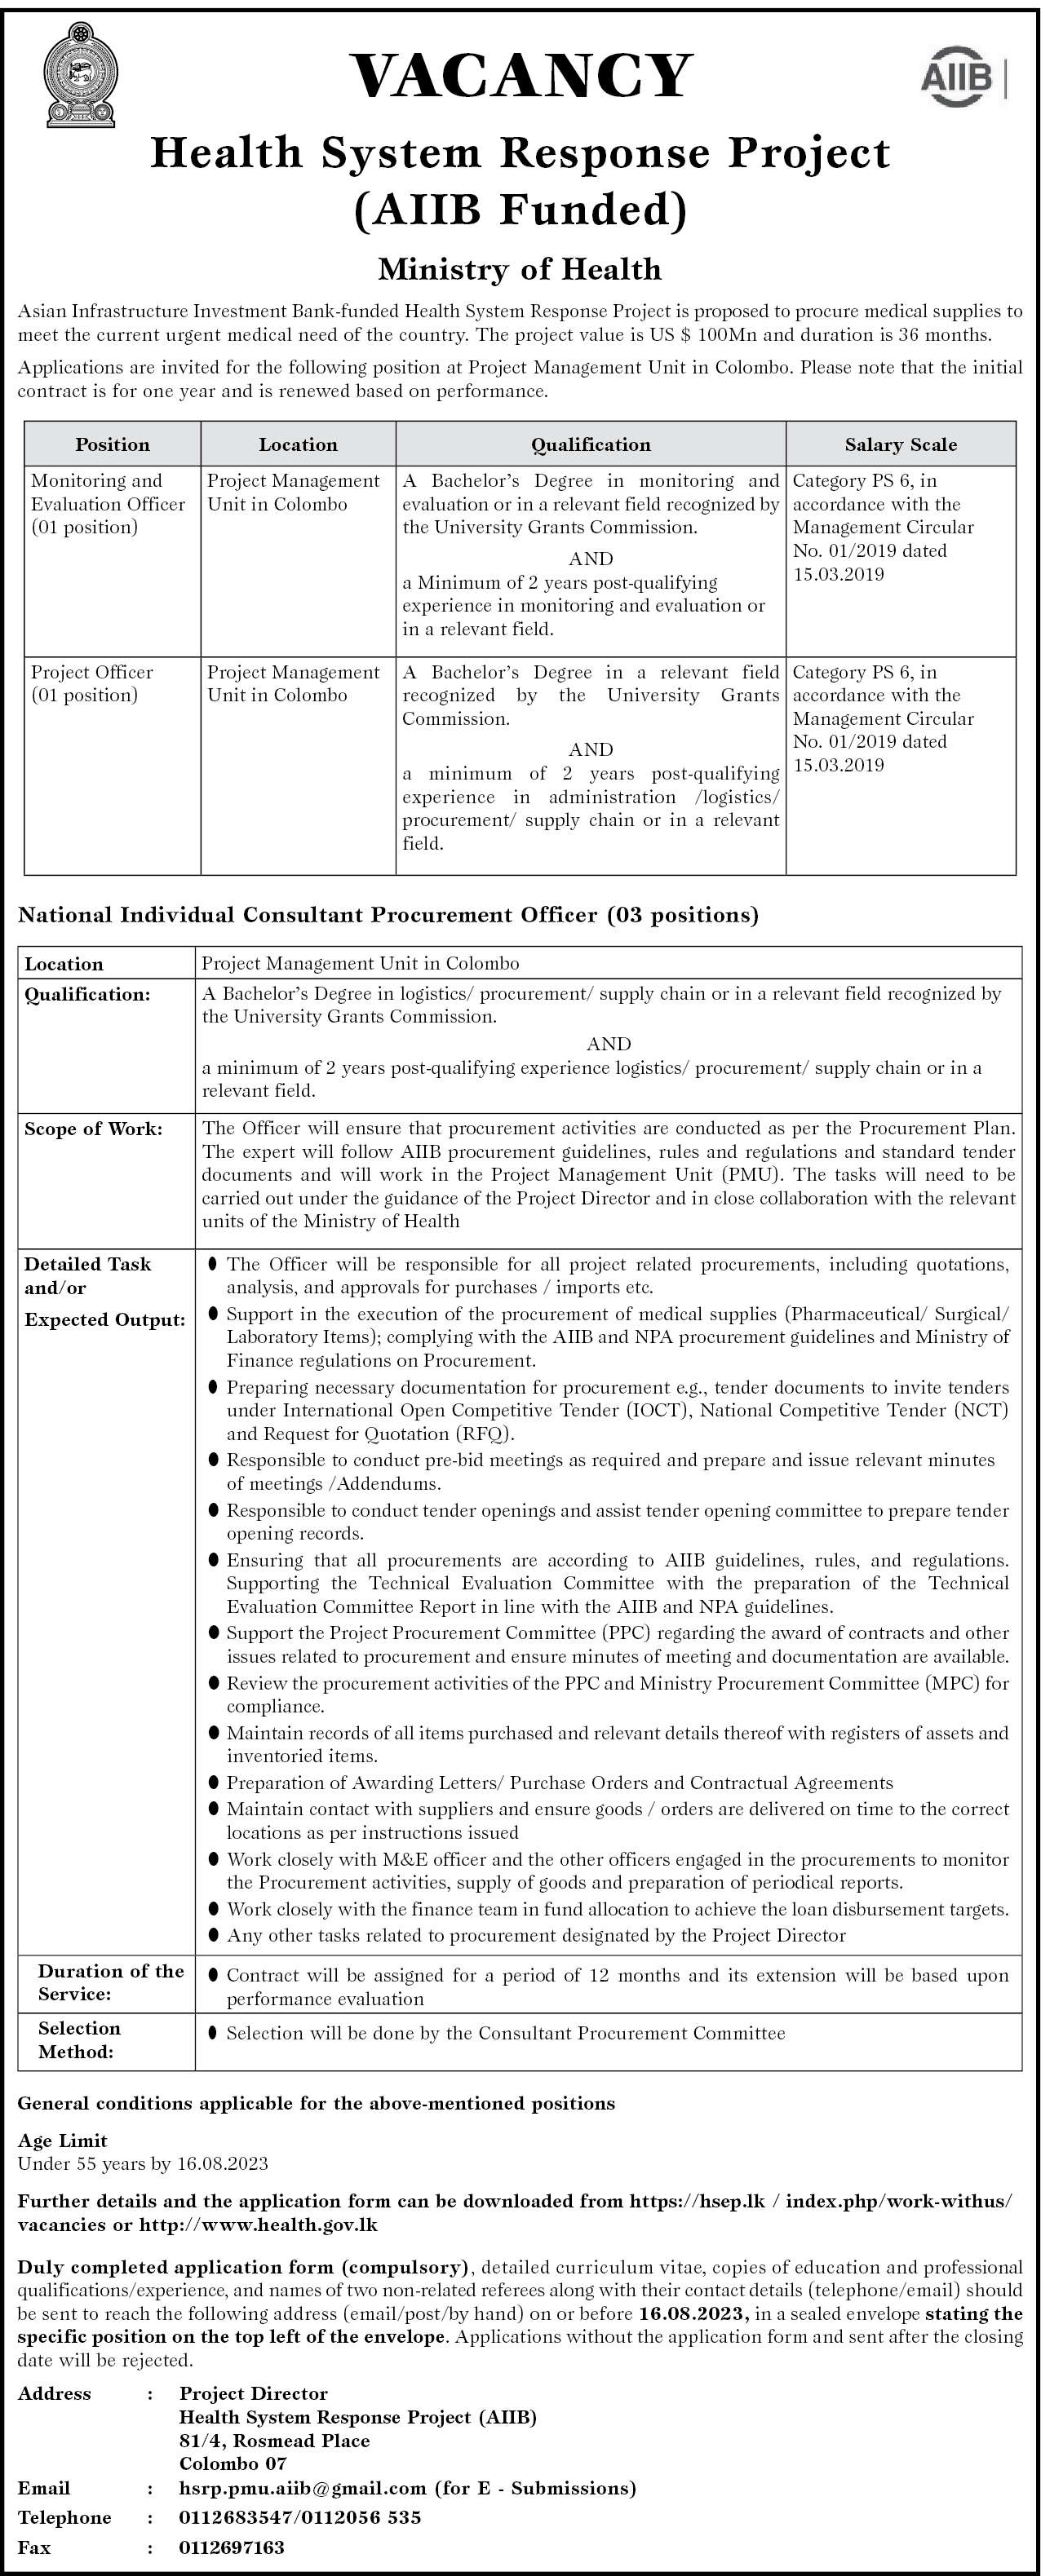 Monitoring and Evaluation officer, Project Officer